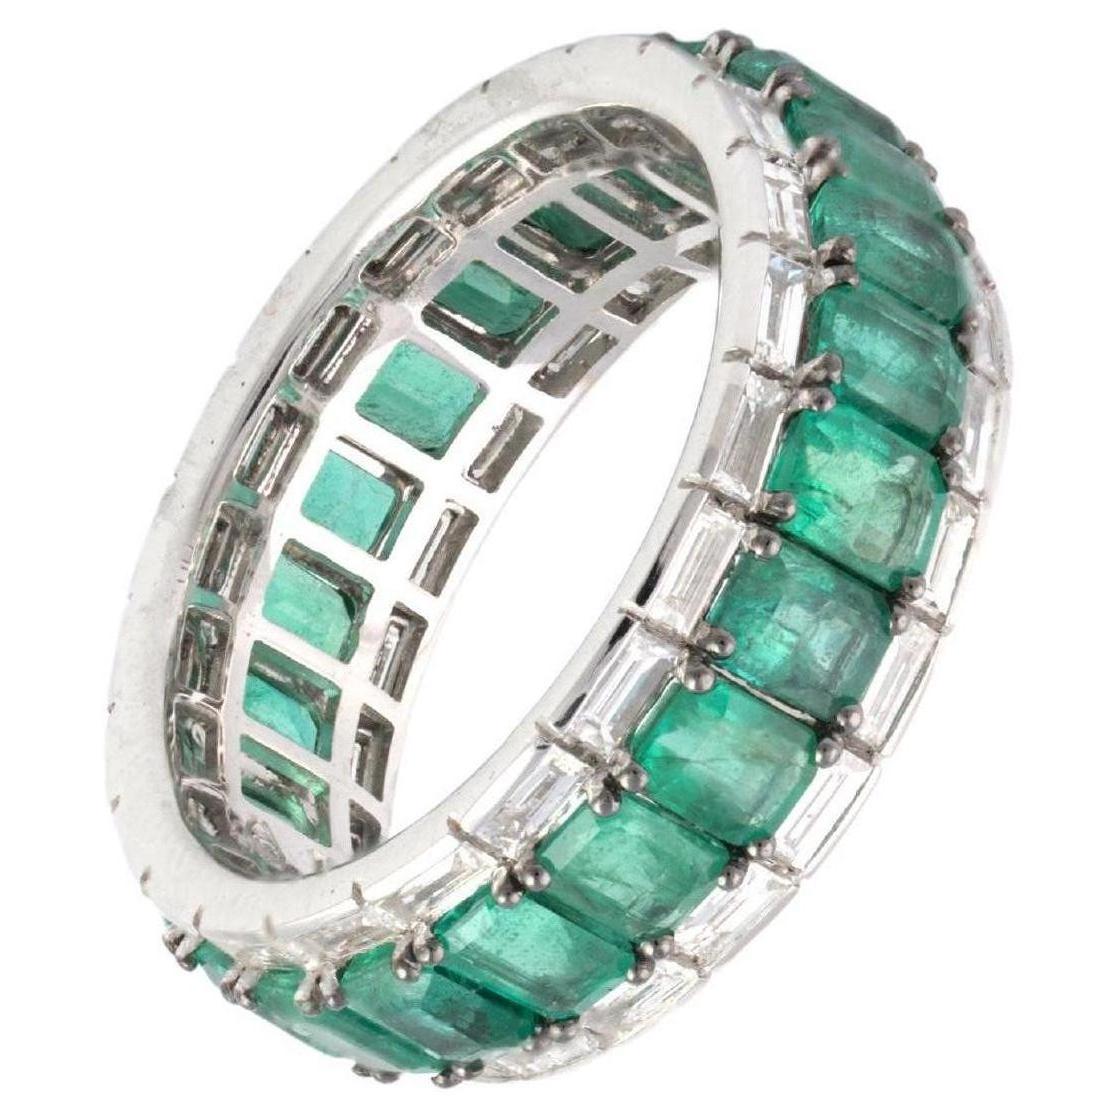 Natural Diamond 1.26cts & Emerald 4.91cts in 18k Gold 4.73gms Ring For Sale